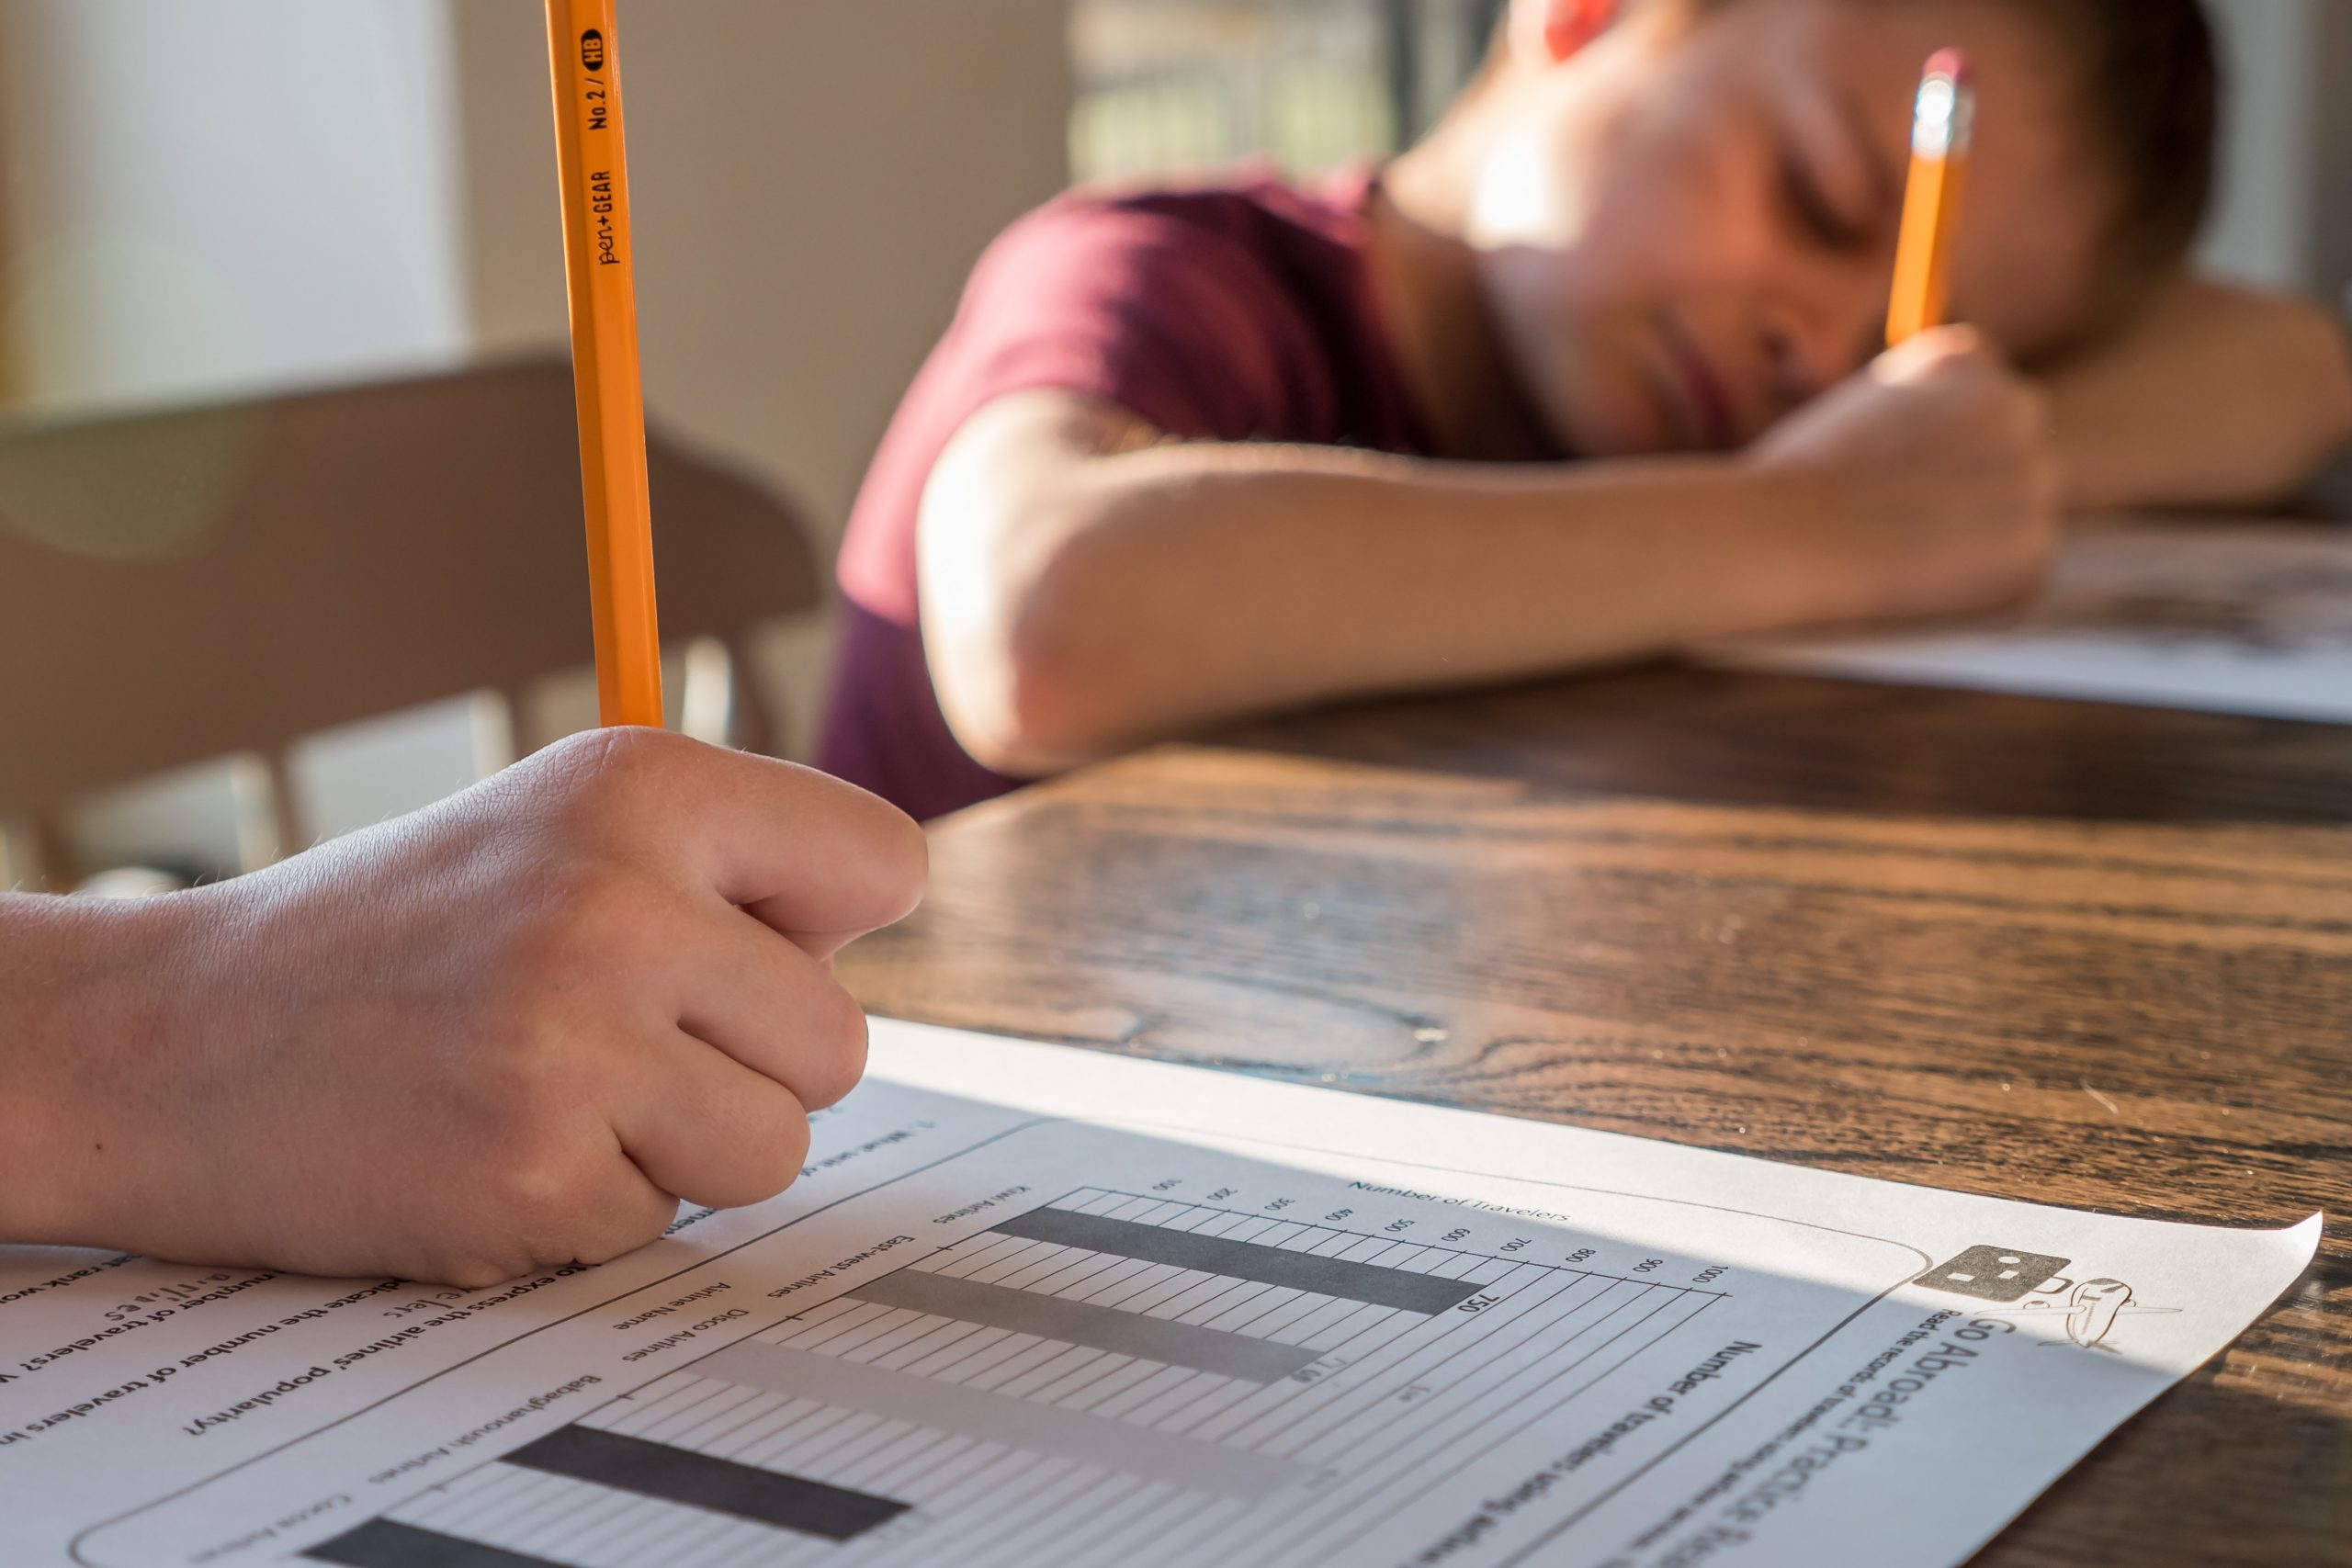 Helping Kids With Test Anxiety